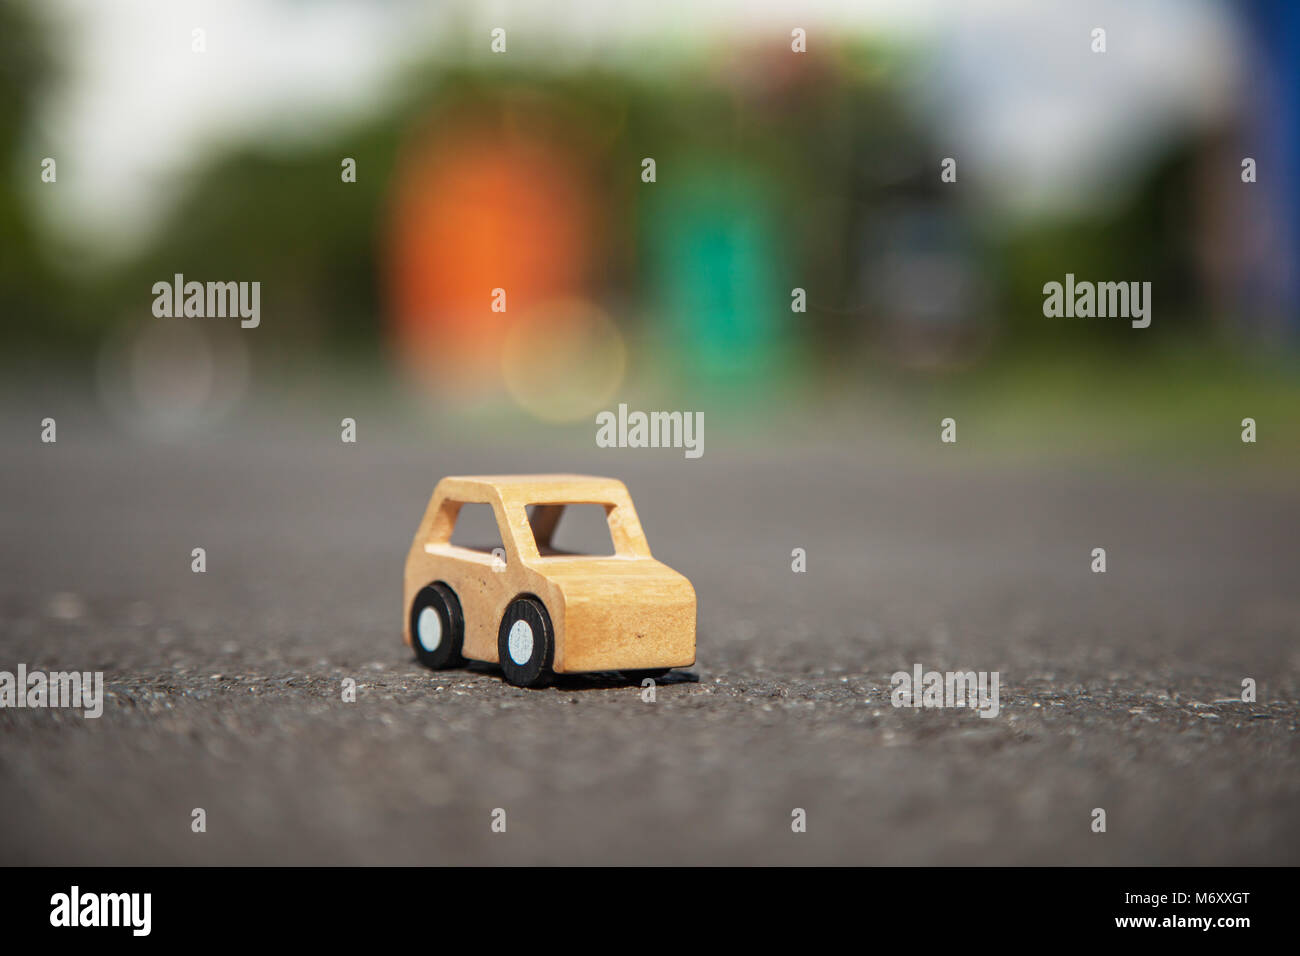 Wooden car model on the road. Stock Photo